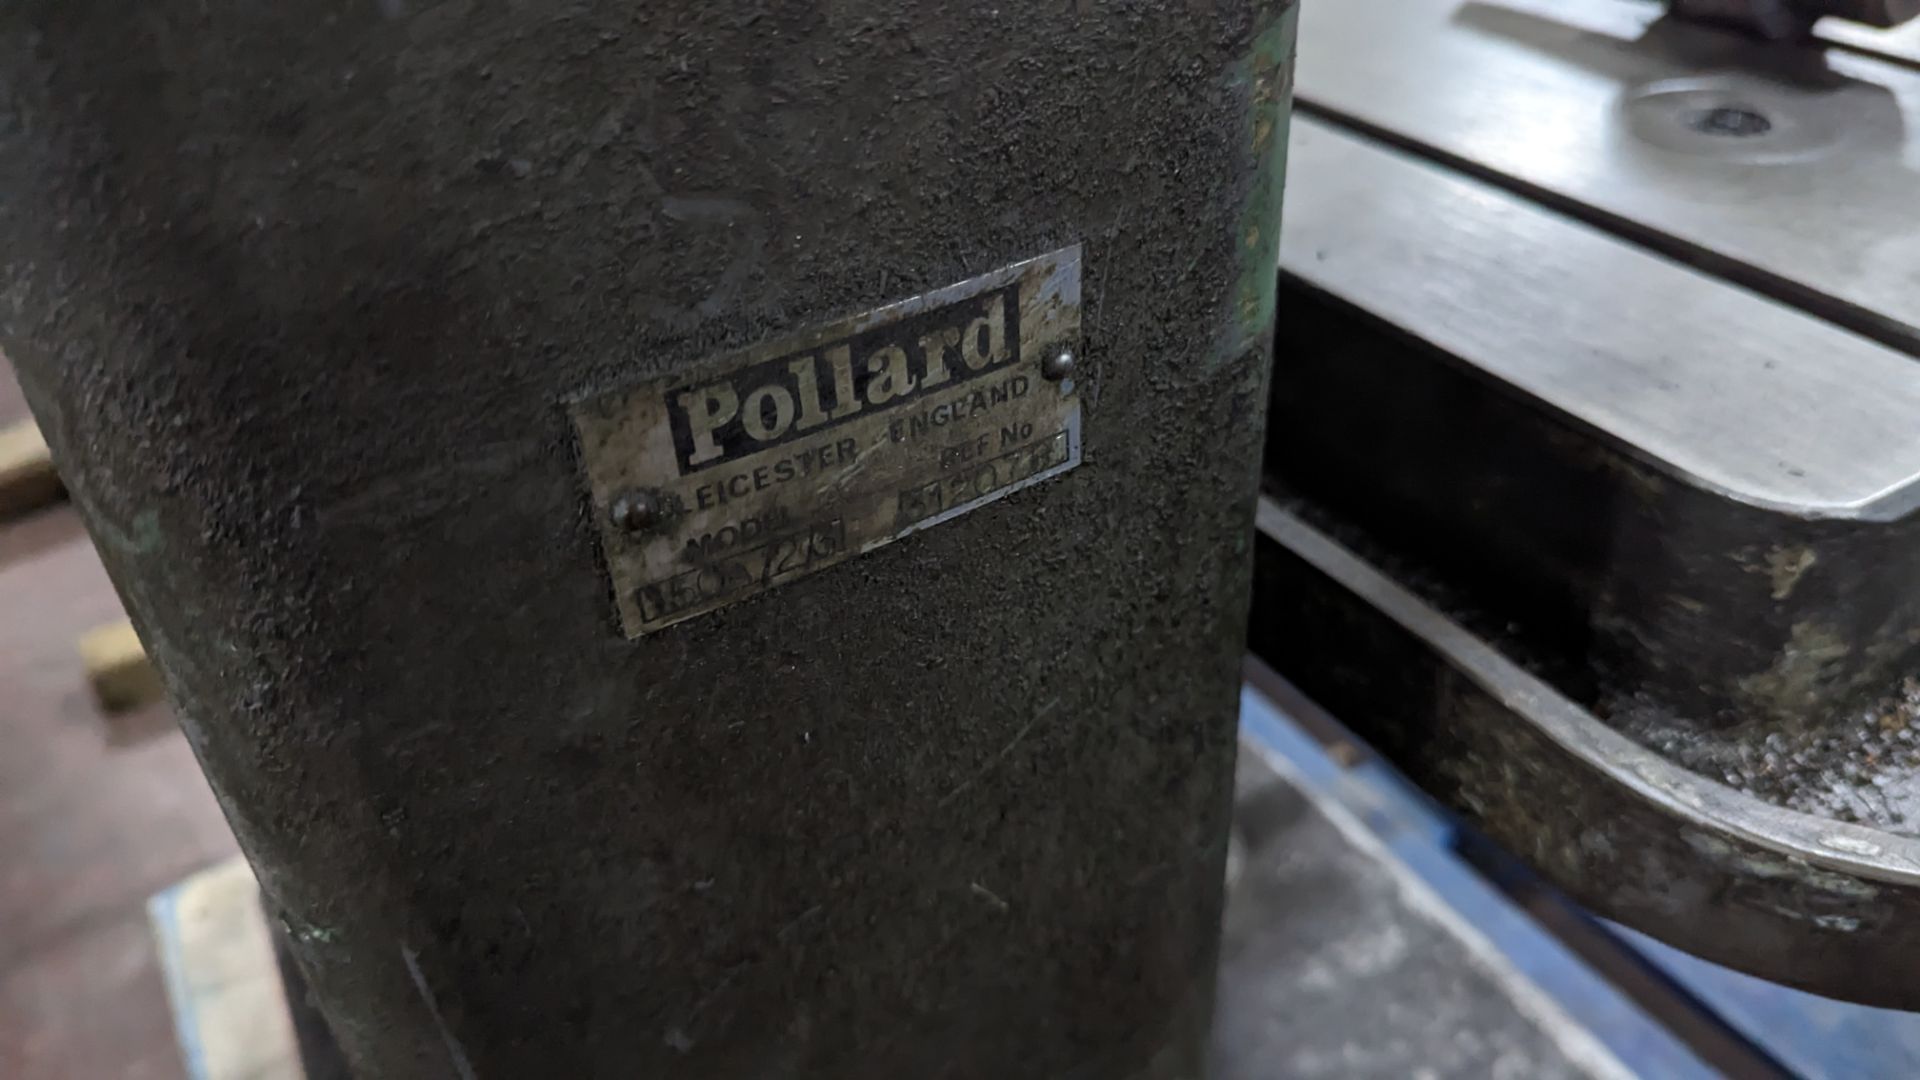 Pollard floor standing twin drill system on heavy duty base - Image 12 of 14